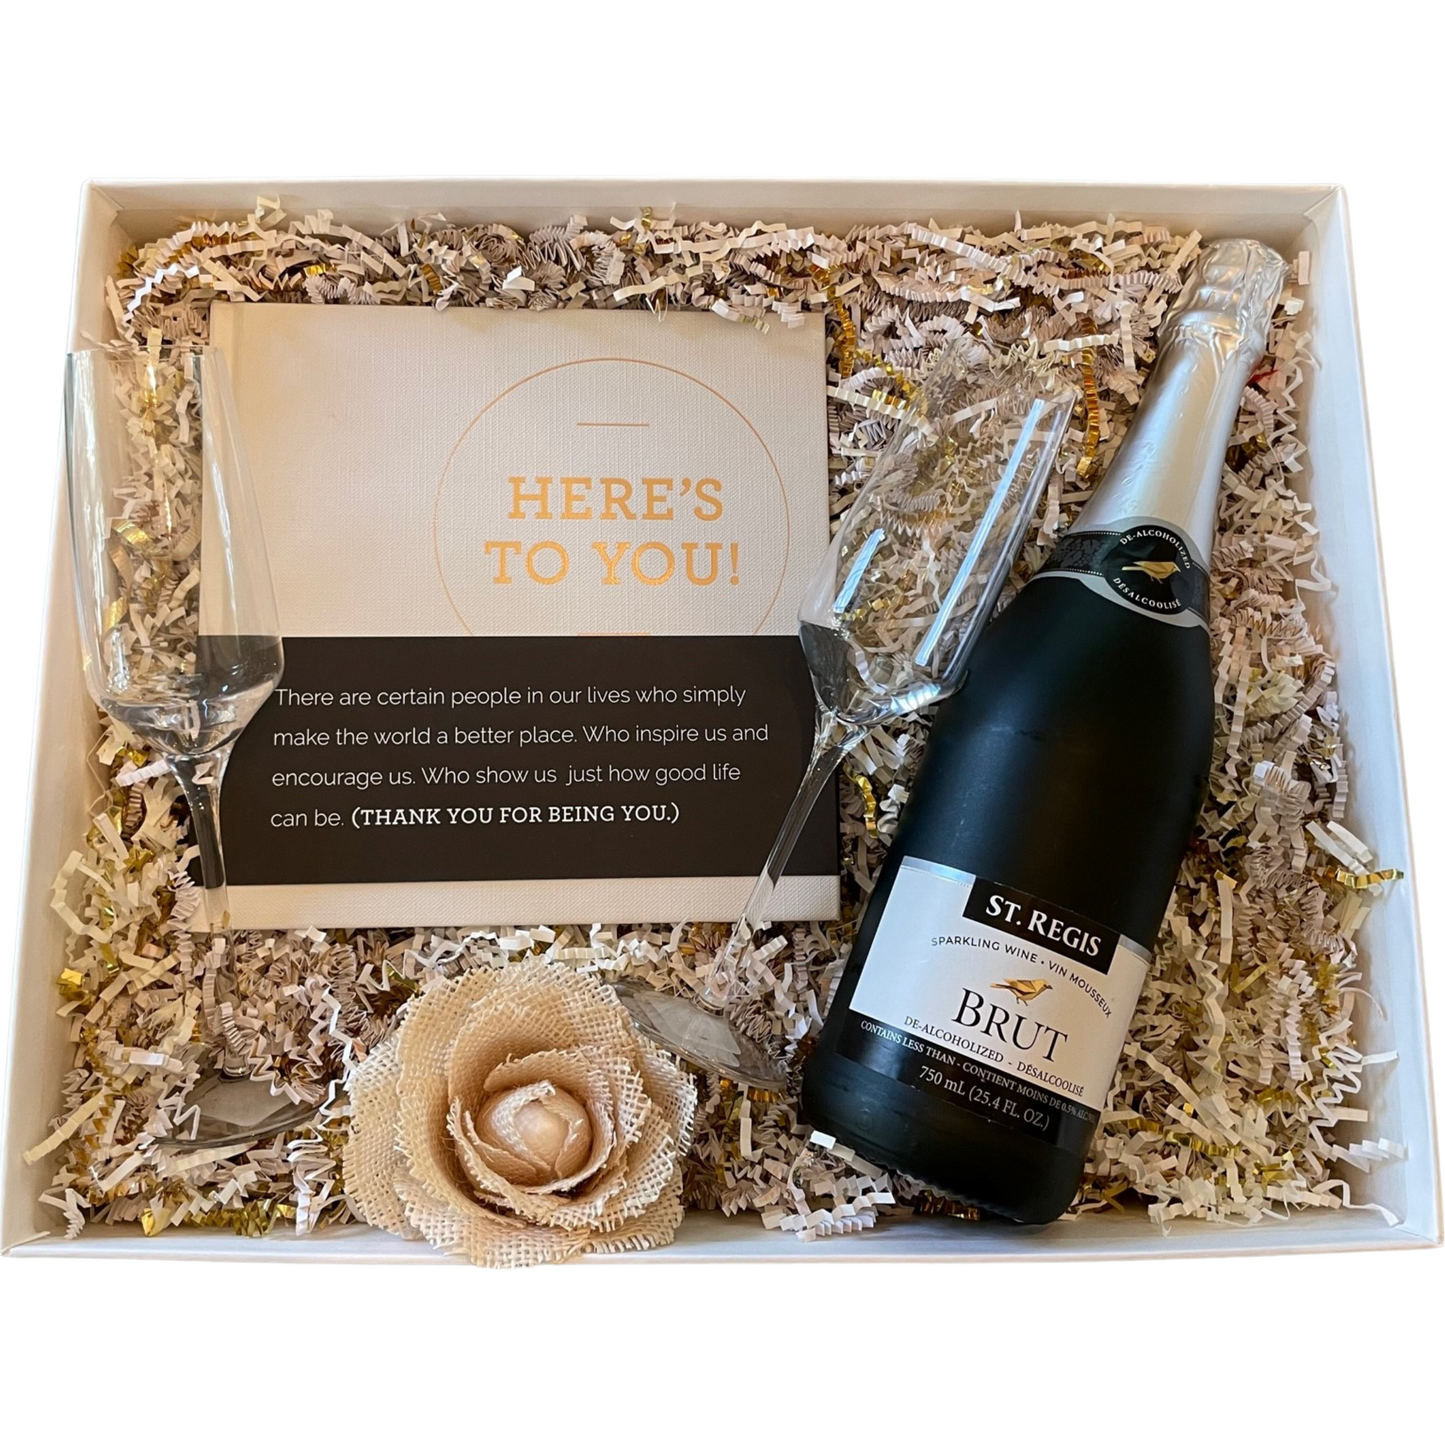 Here’s To You Bruit Gift Box - DJW Custom Baskets & Beyond